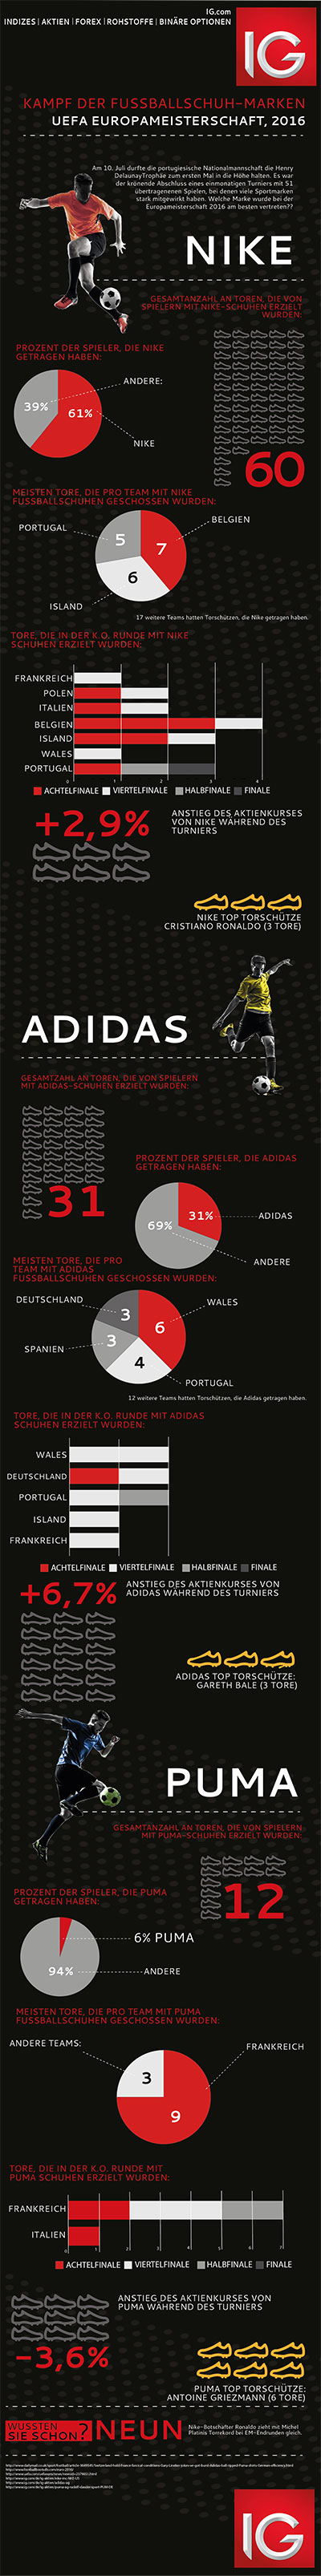 IG-Infographic_German-APPROVED